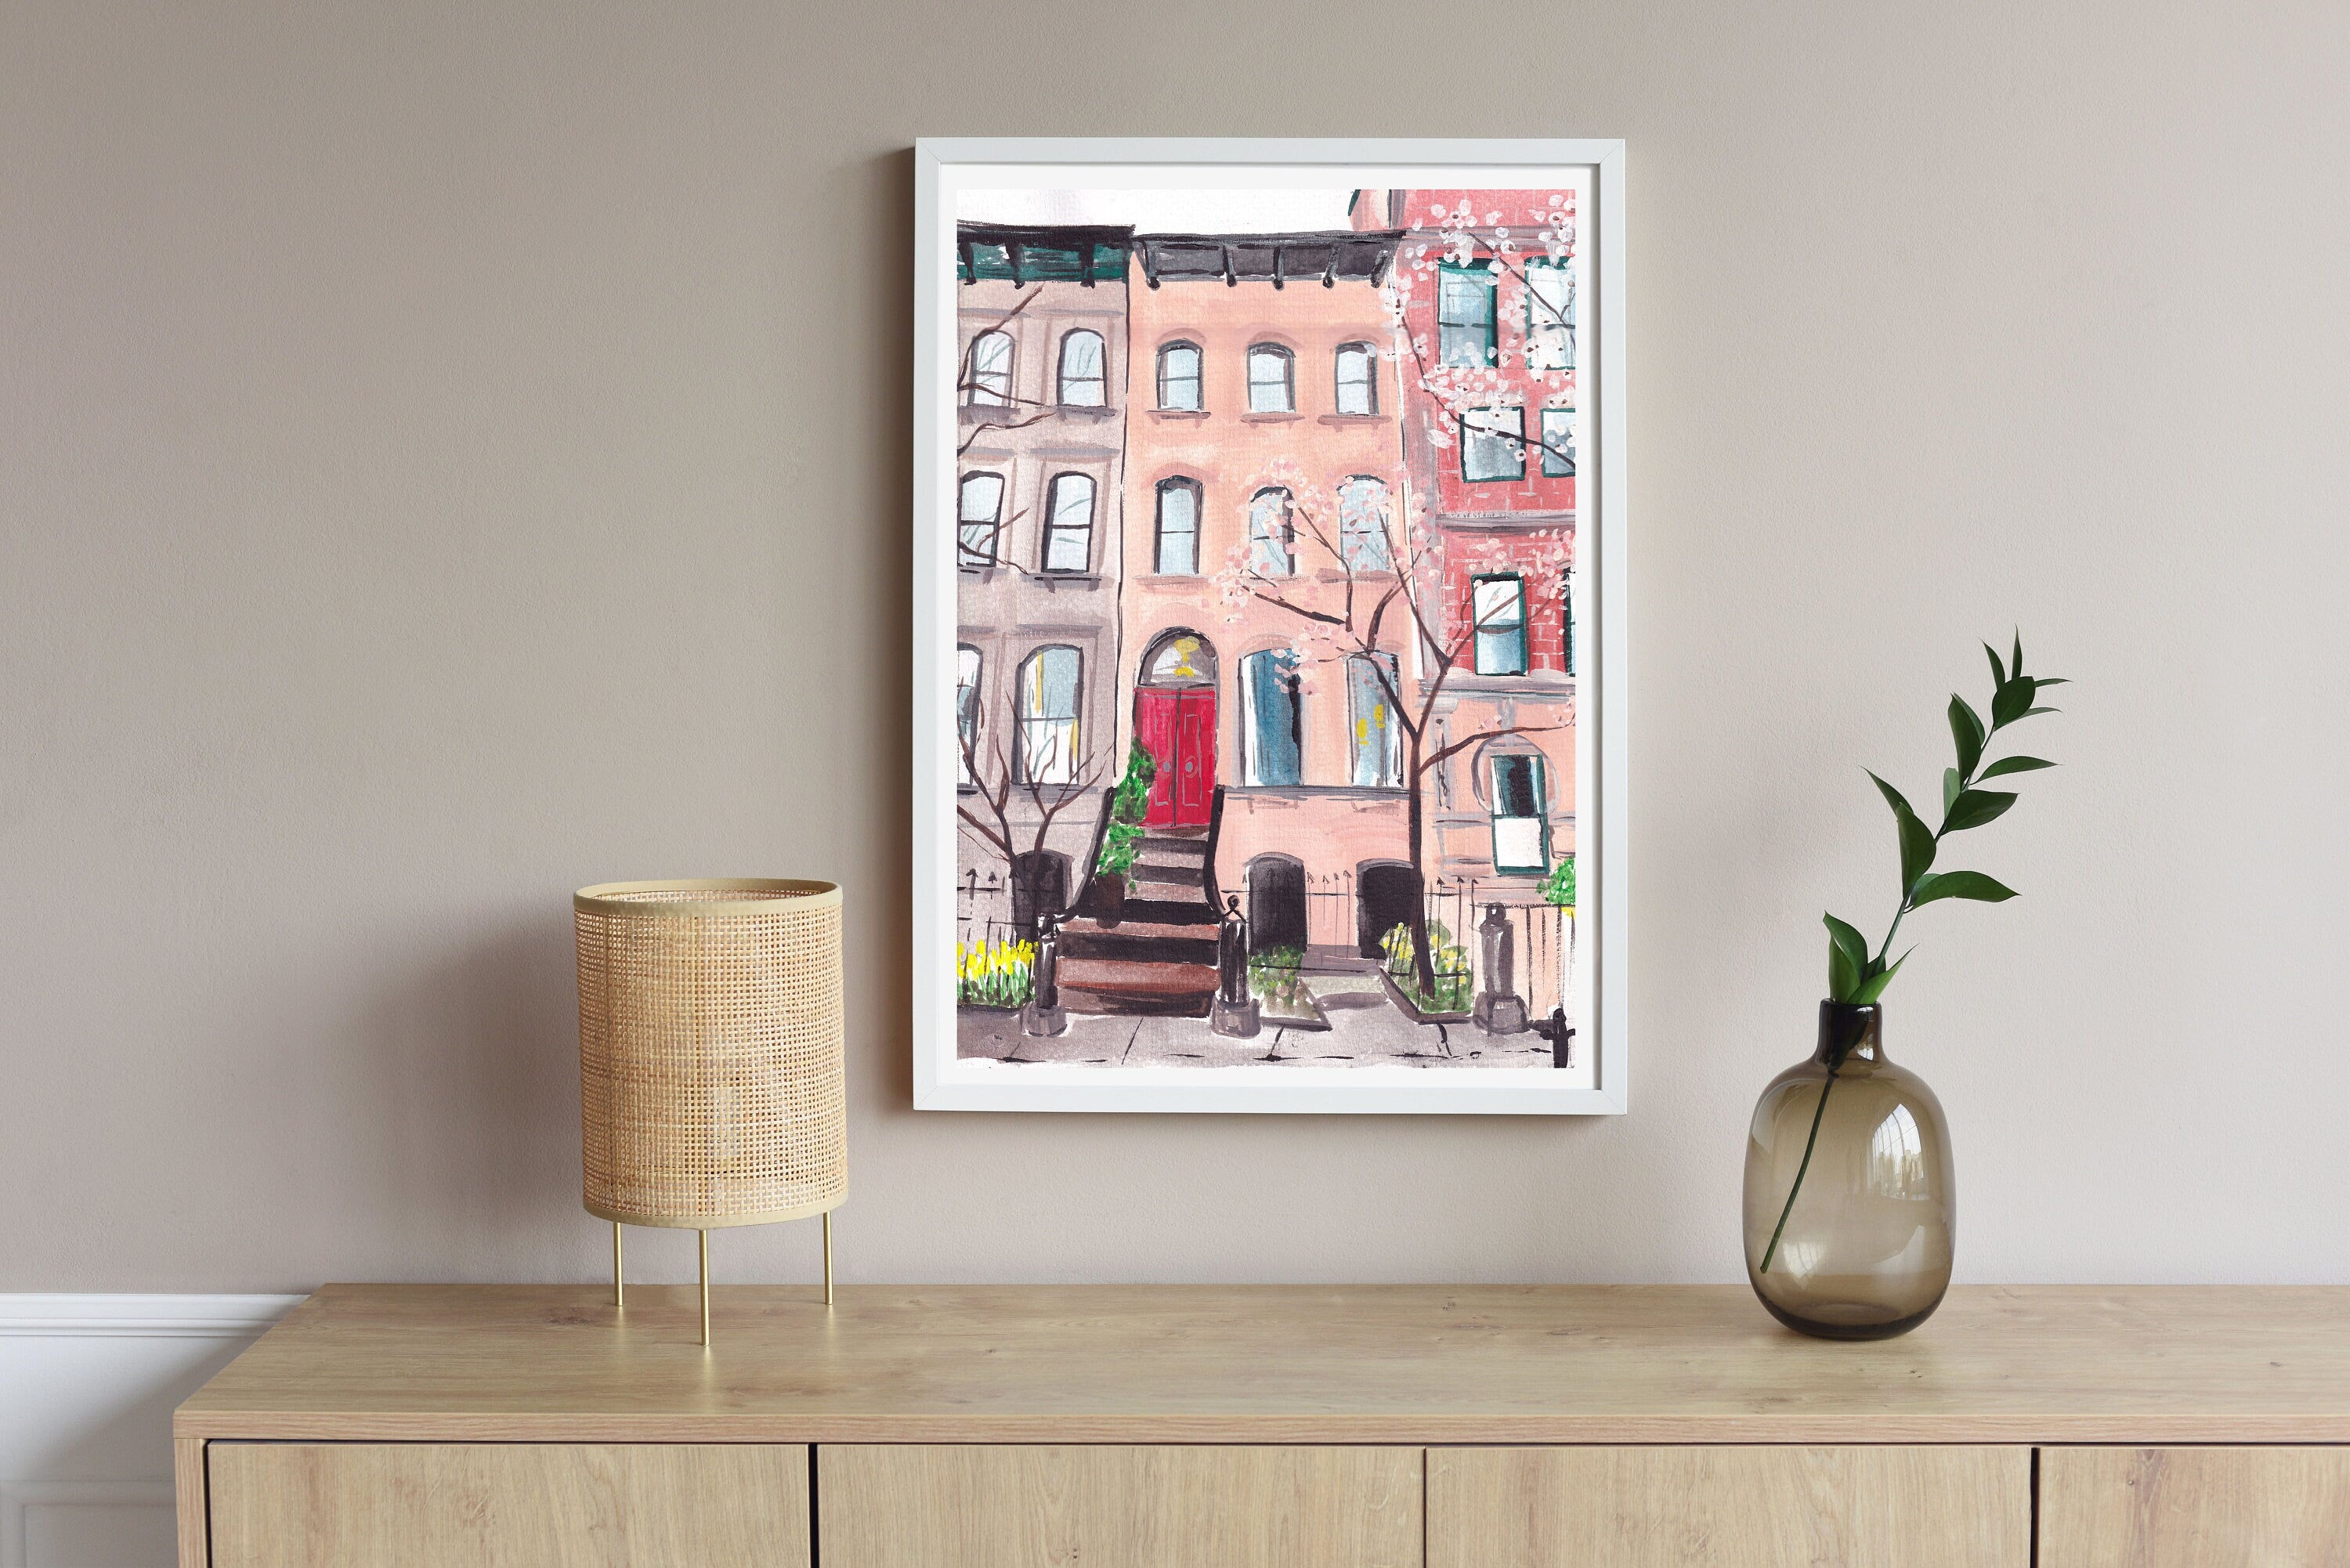 New York city brownstone print of painting by Medjool Studio. Print of original gouache painting of a New York City building.